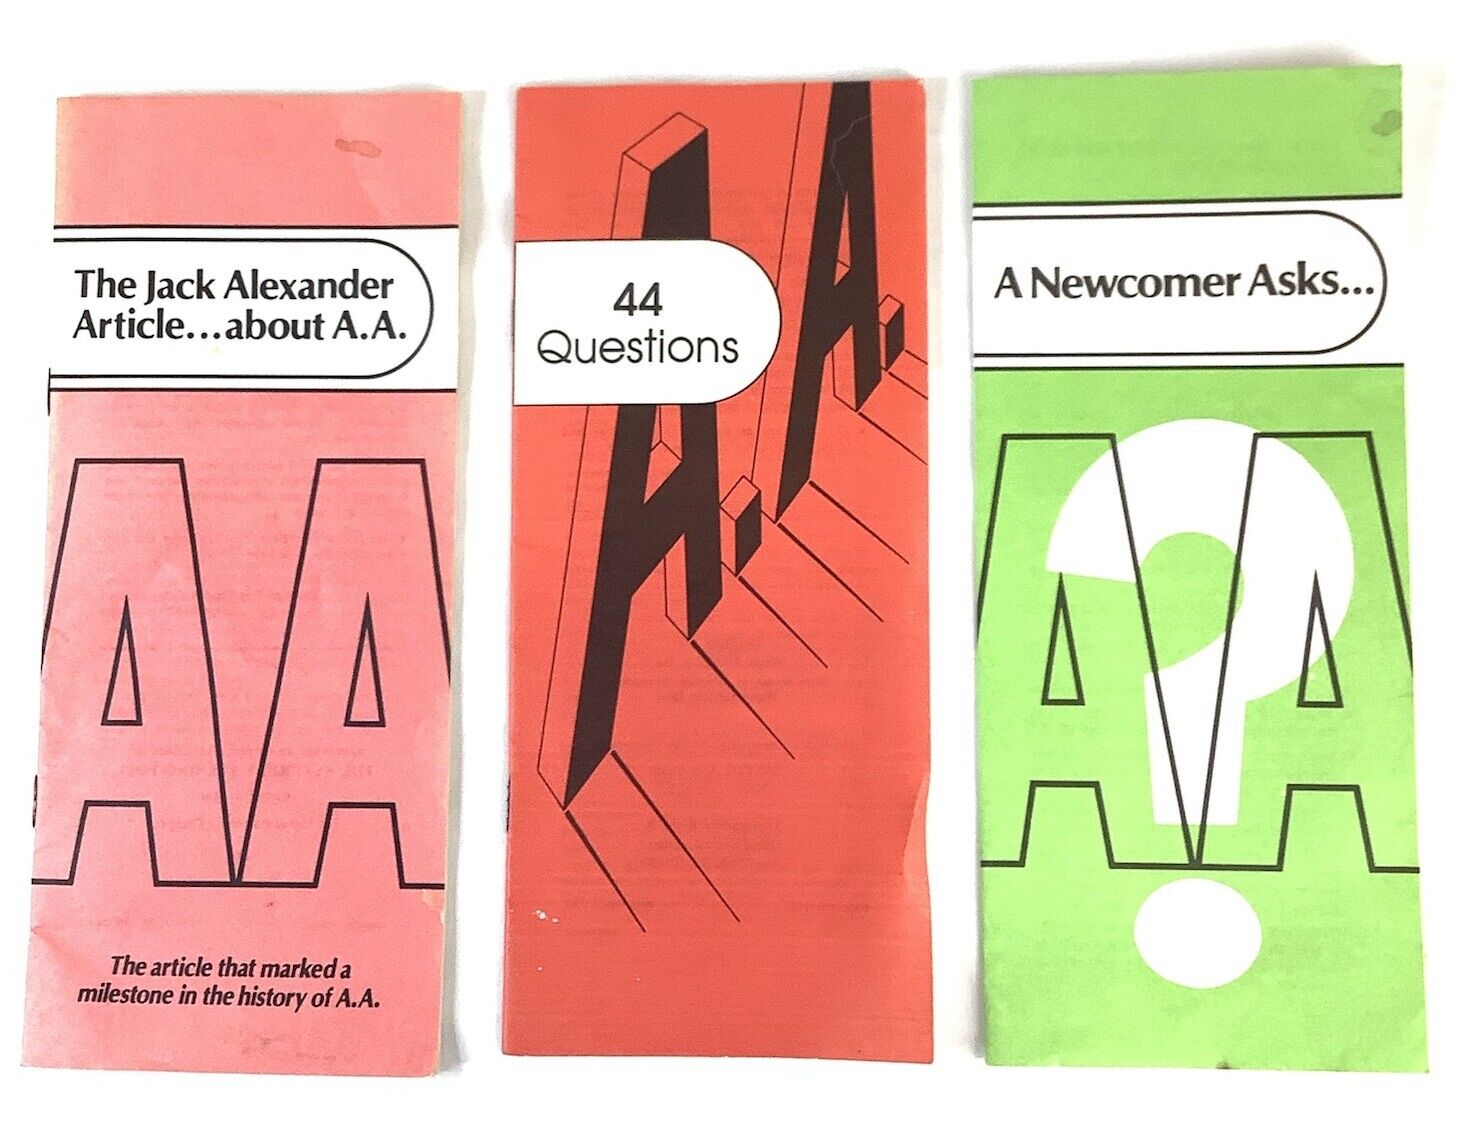 Alcoholics Anonymous Pamphlets Lot Of 3- 1952, 1963, 1981 12 Steps, 44 Questions